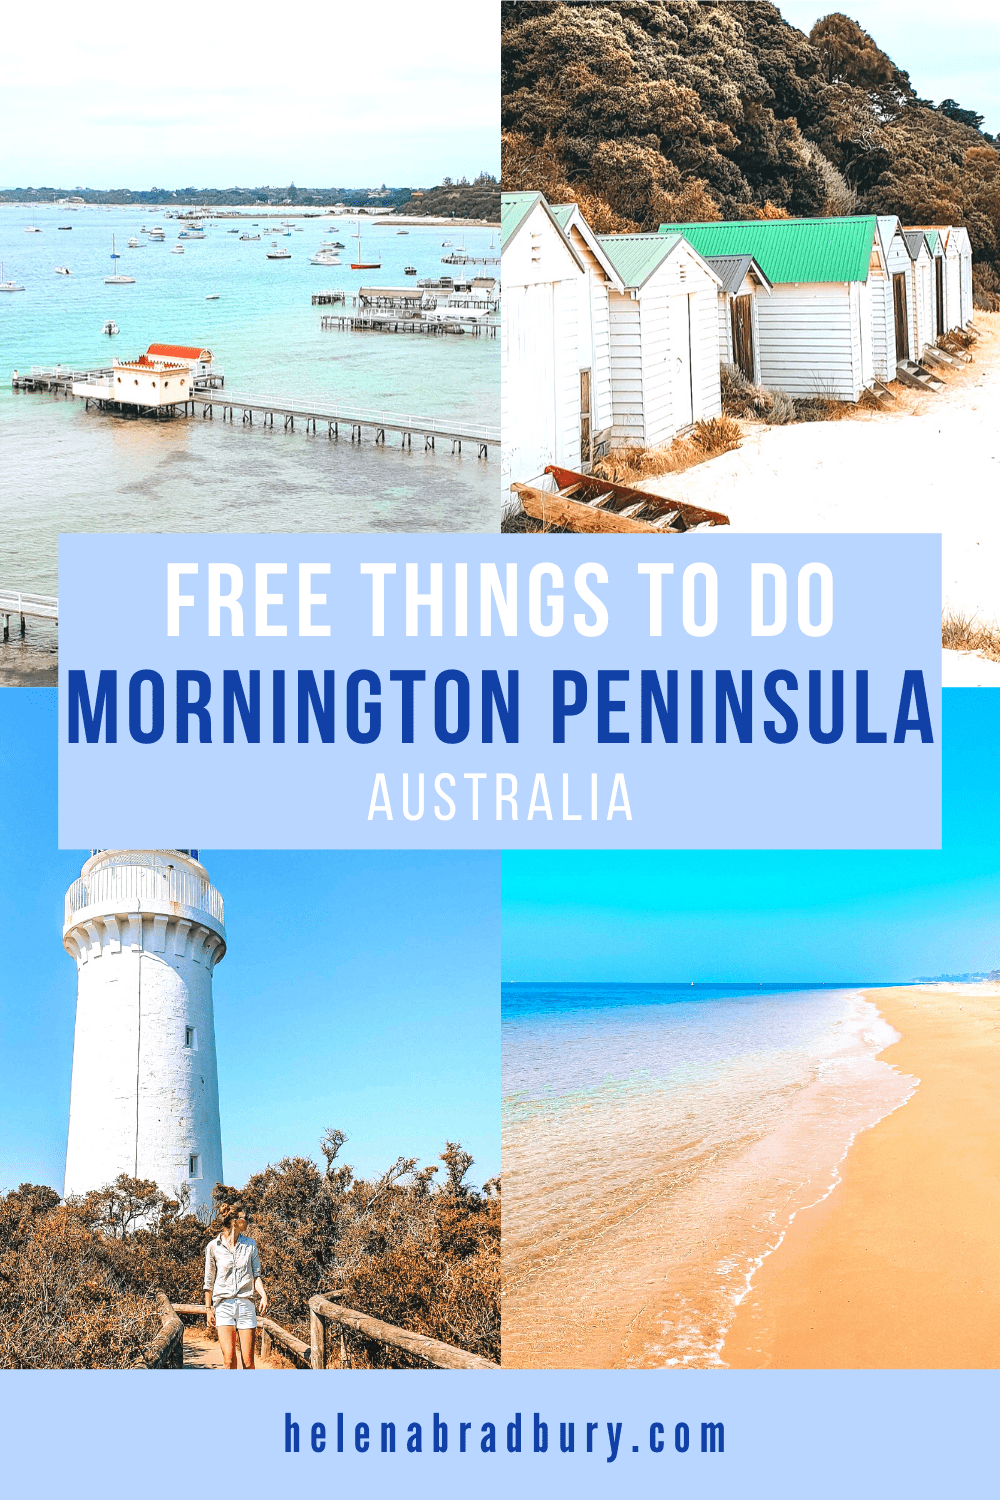 Outdoor Mornington Peninsula activities that are all completely free!